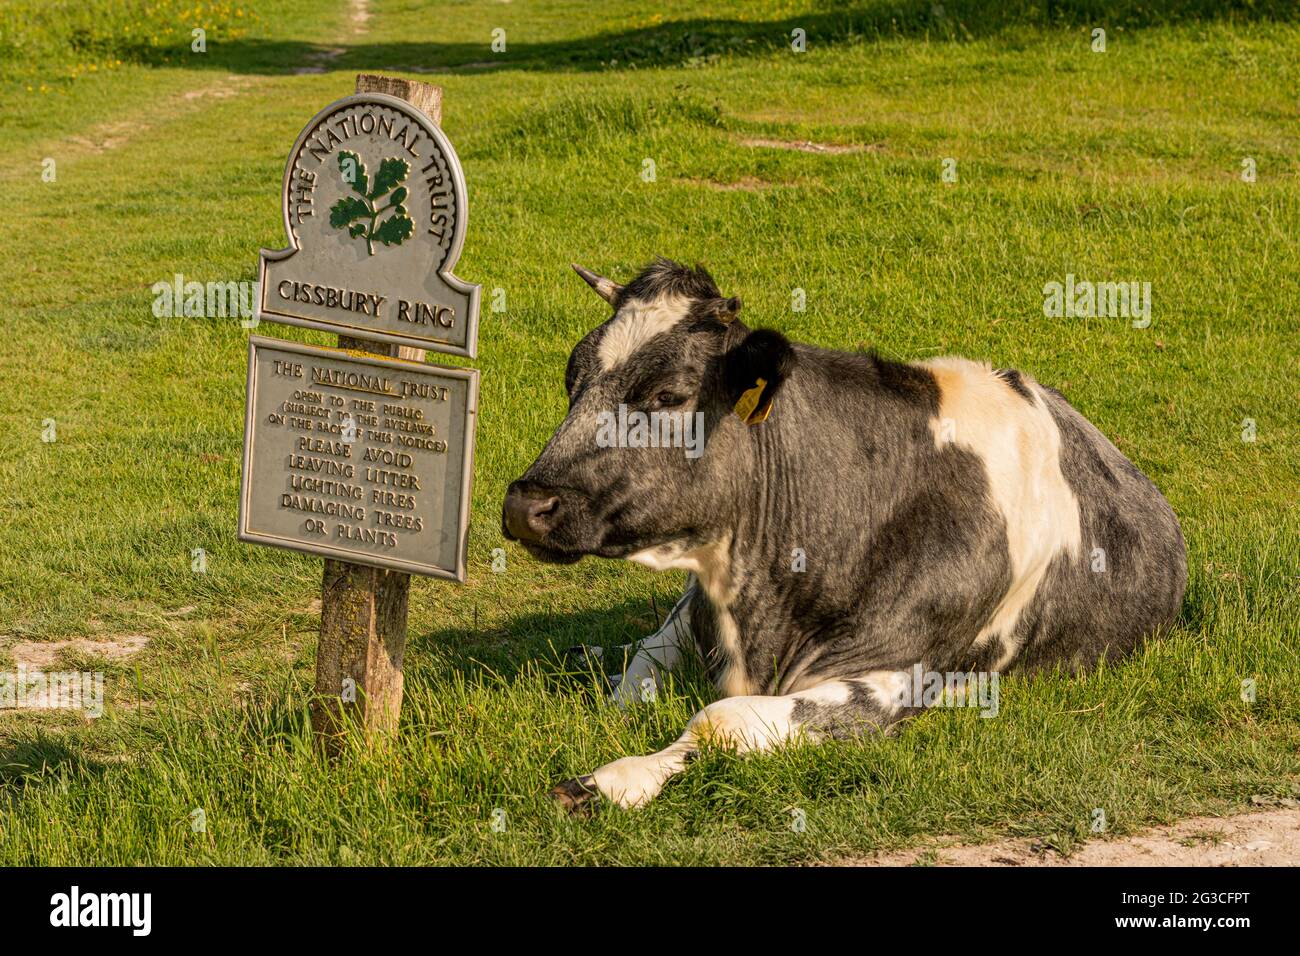 Comical image of a cow next to a National Trust sign for the hill fort os Cissbury Ring in the South Downs National park, West Sussex, UK. Stock Photo